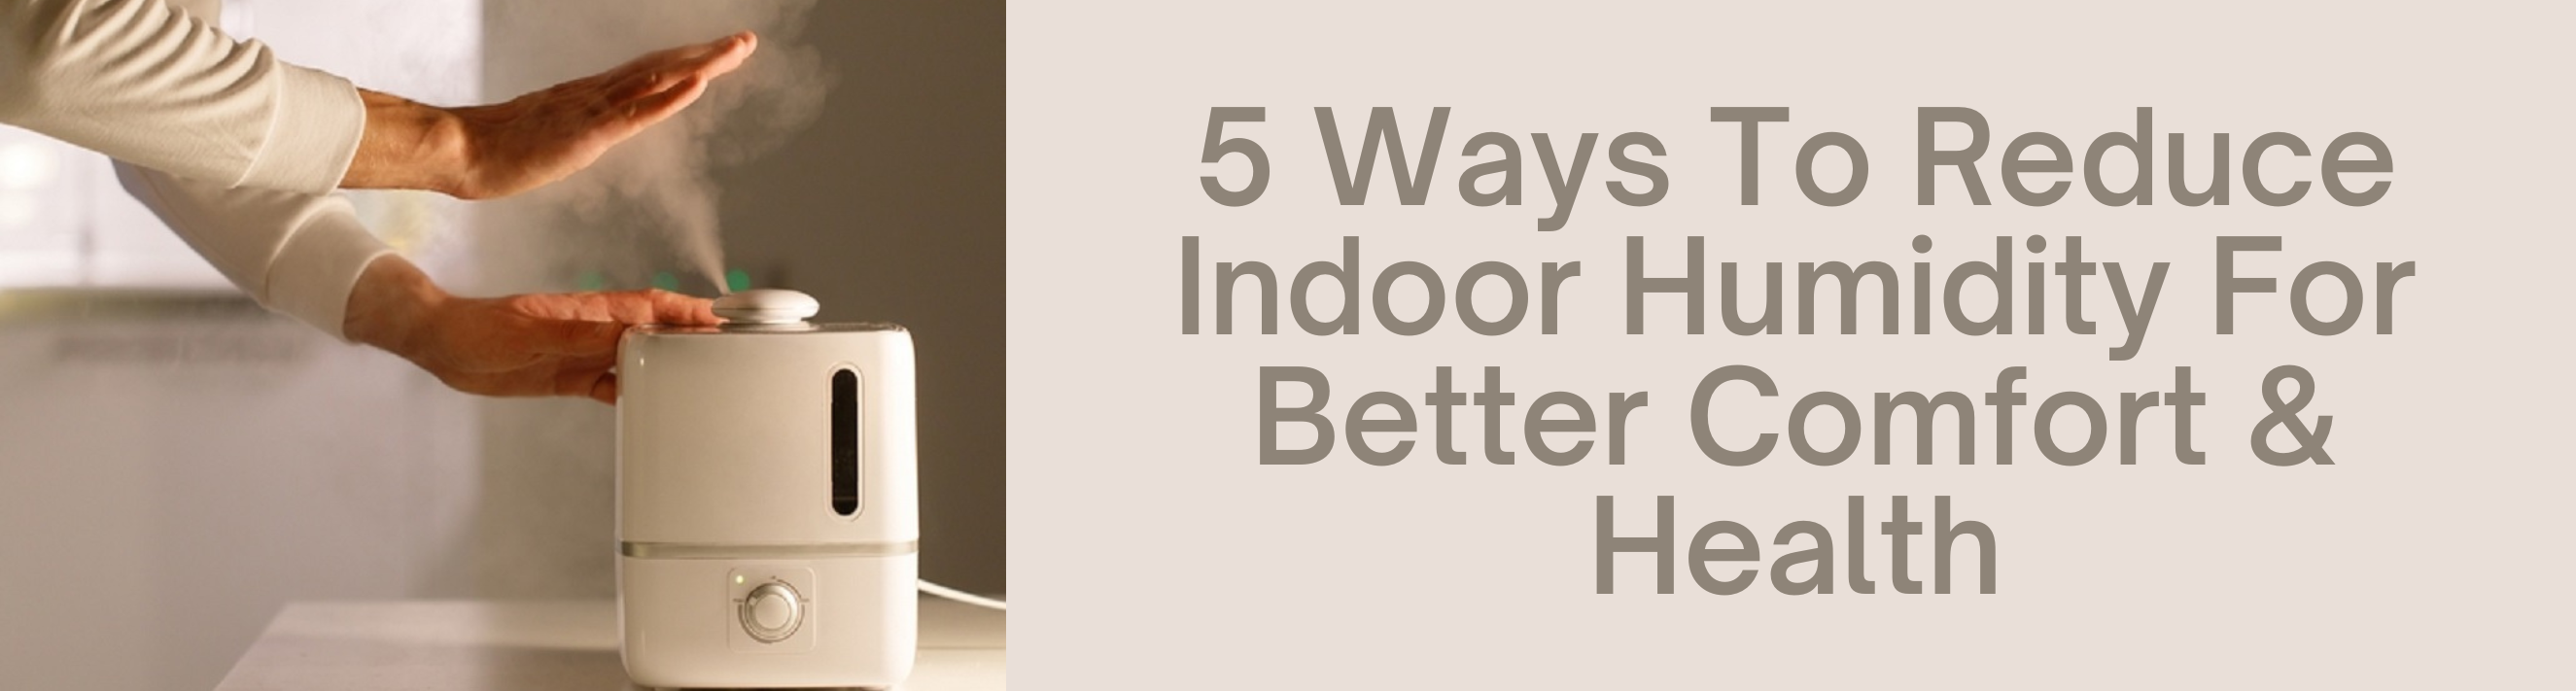 Image for 5 Ways to Reduce Indoor Humidity for Better Comfort & Health